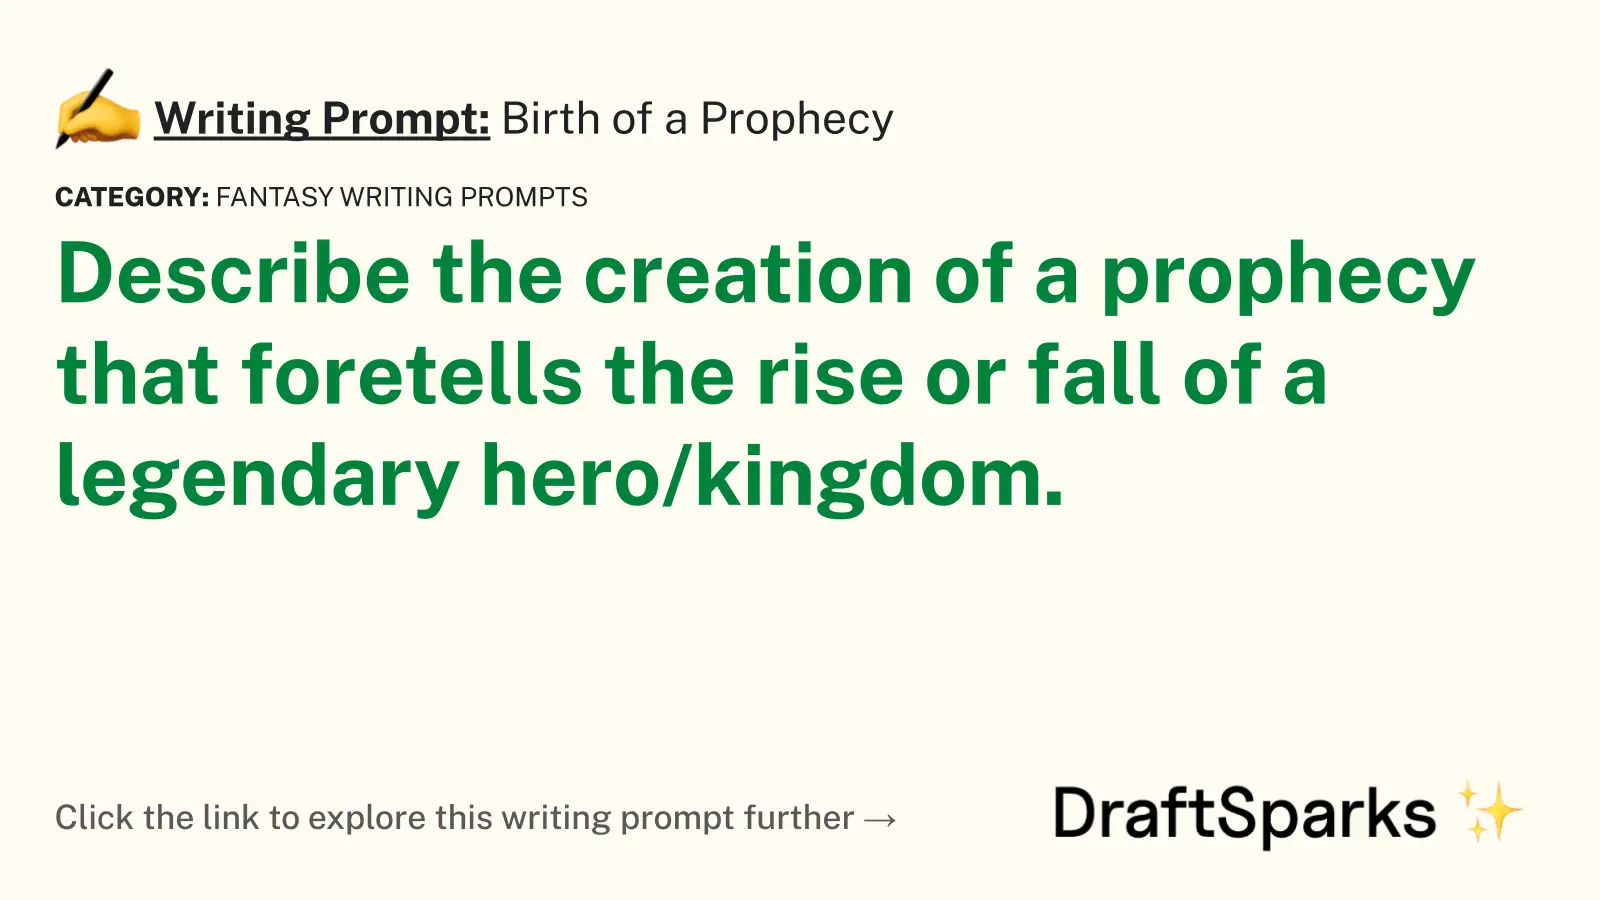 Birth of a Prophecy